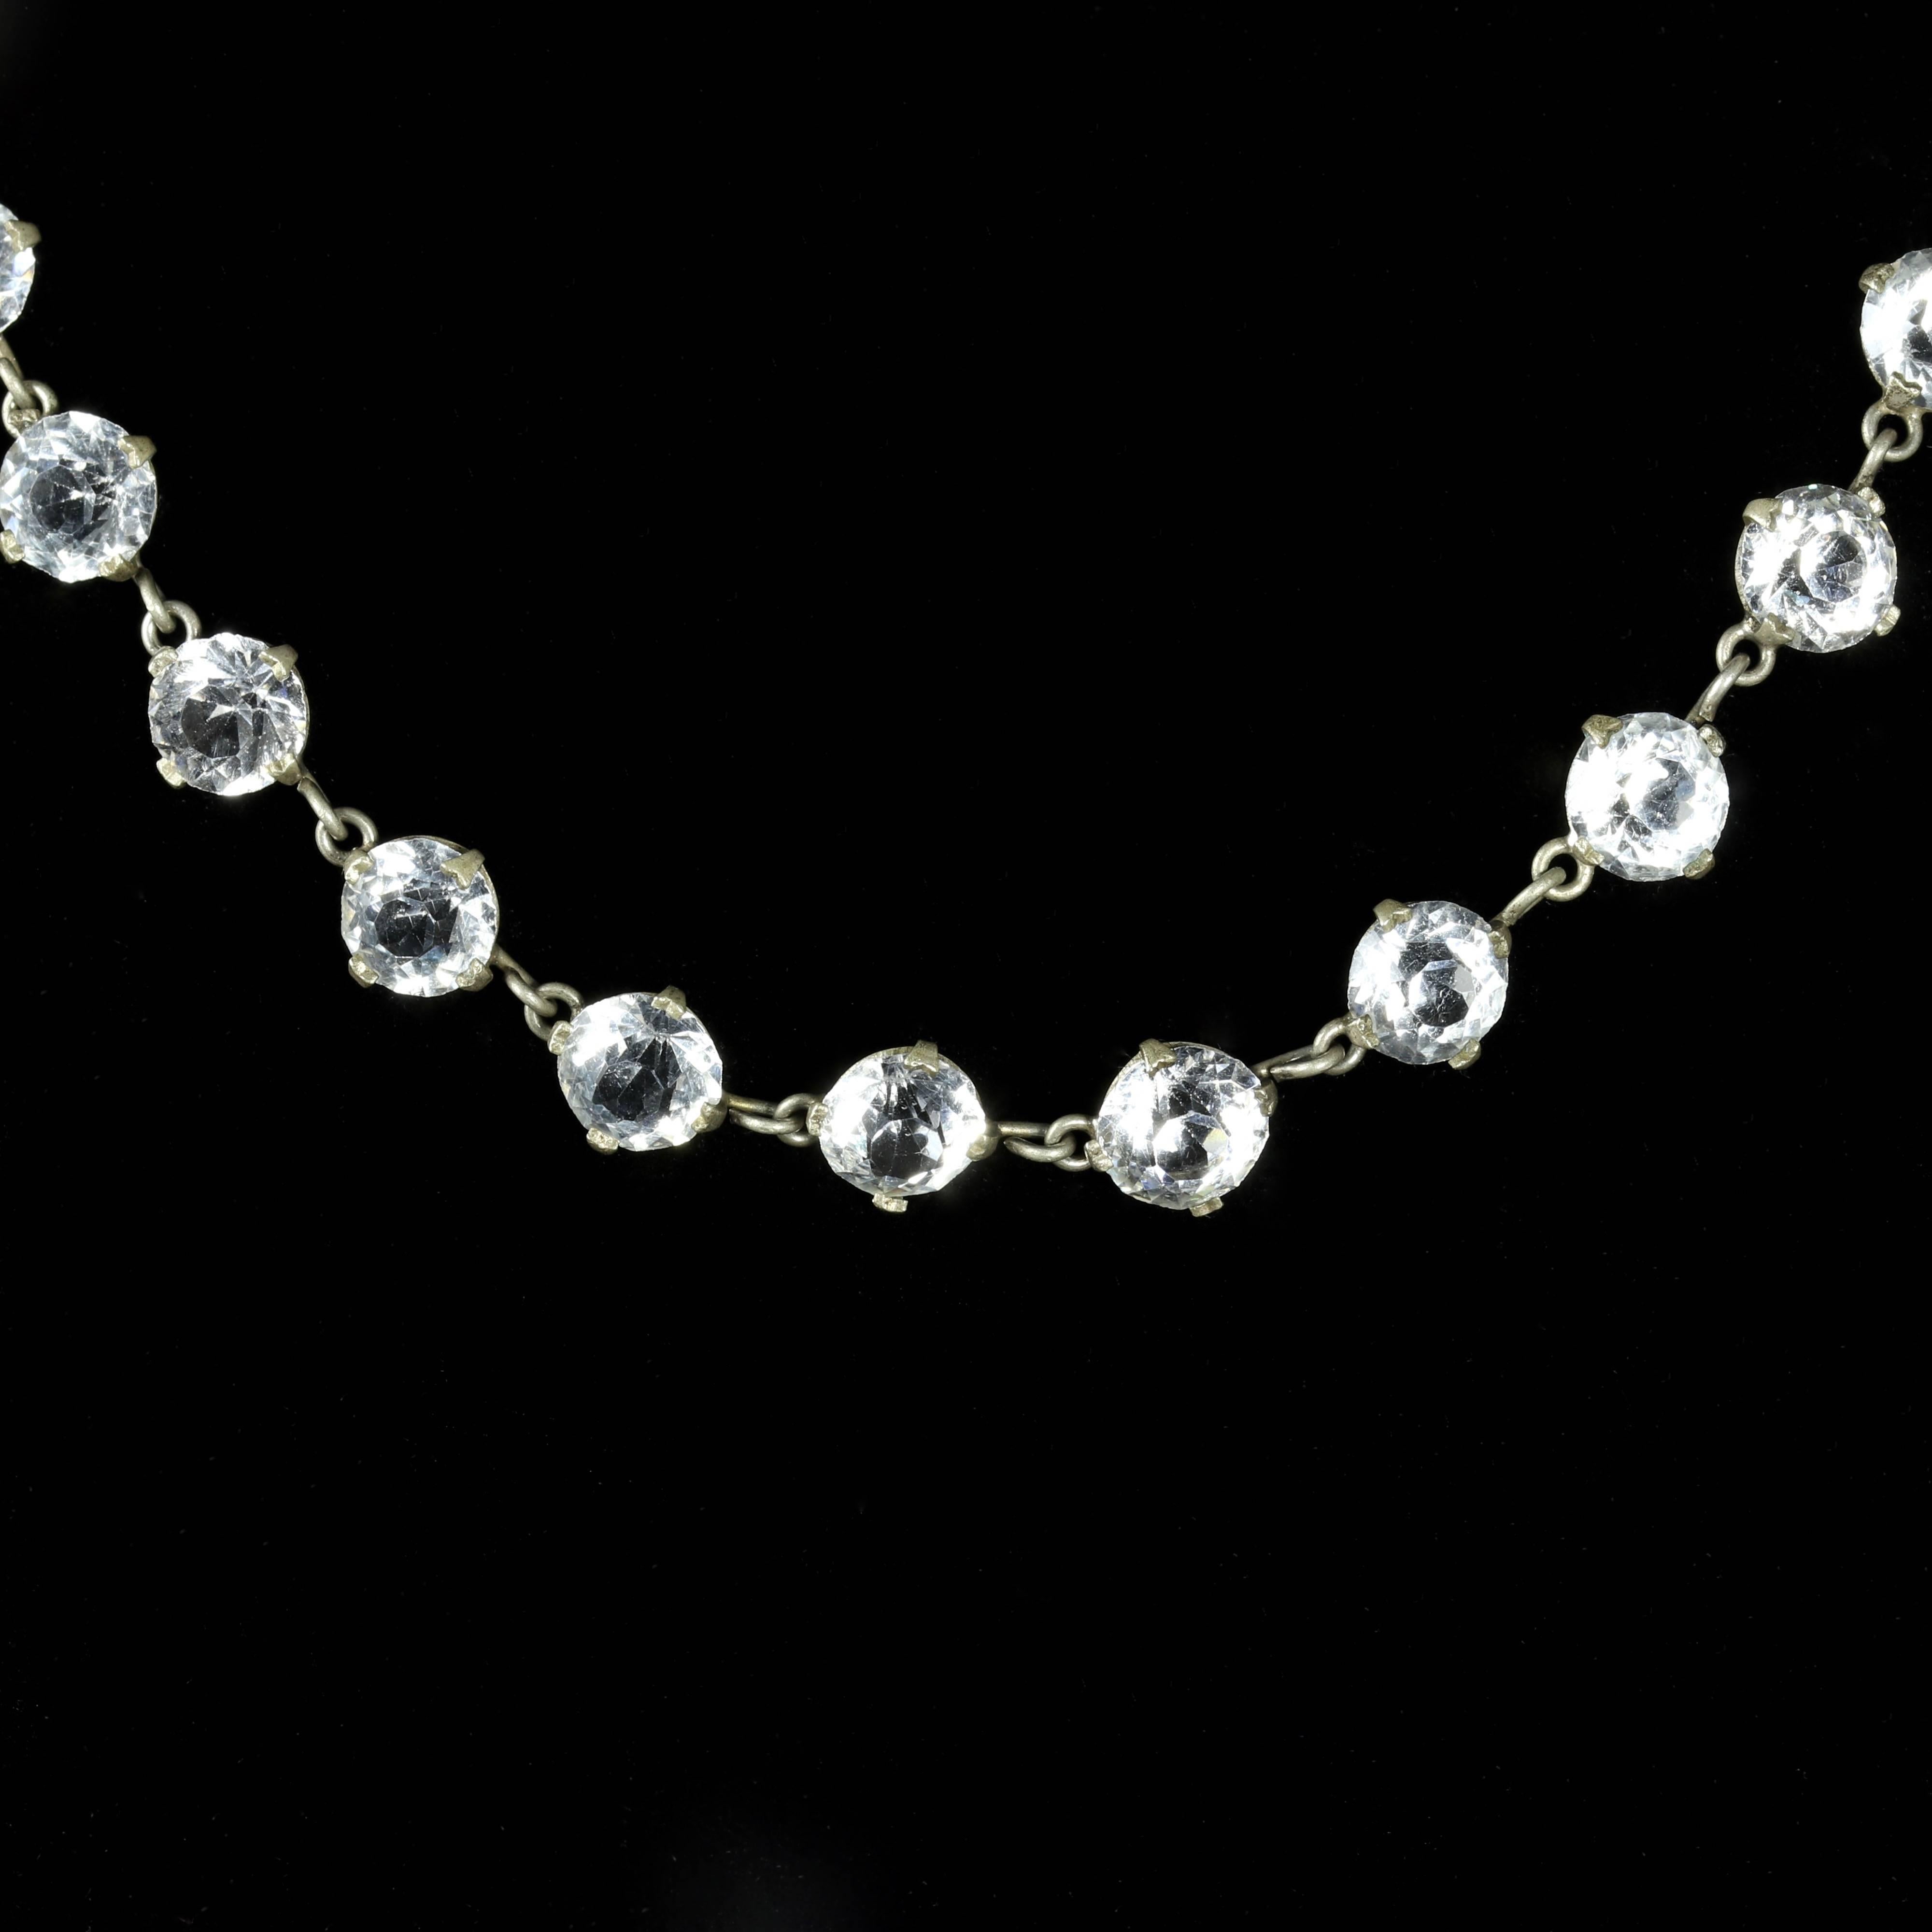 This fabulous Sterling Silver Paste Stone necklace is Circa 1900.

Beautiful round Paste Stones sit around the neck and cascade down beautifully, all set in White metal.

Paste is a heavy, very transparent flint glass that stimulates the fire and